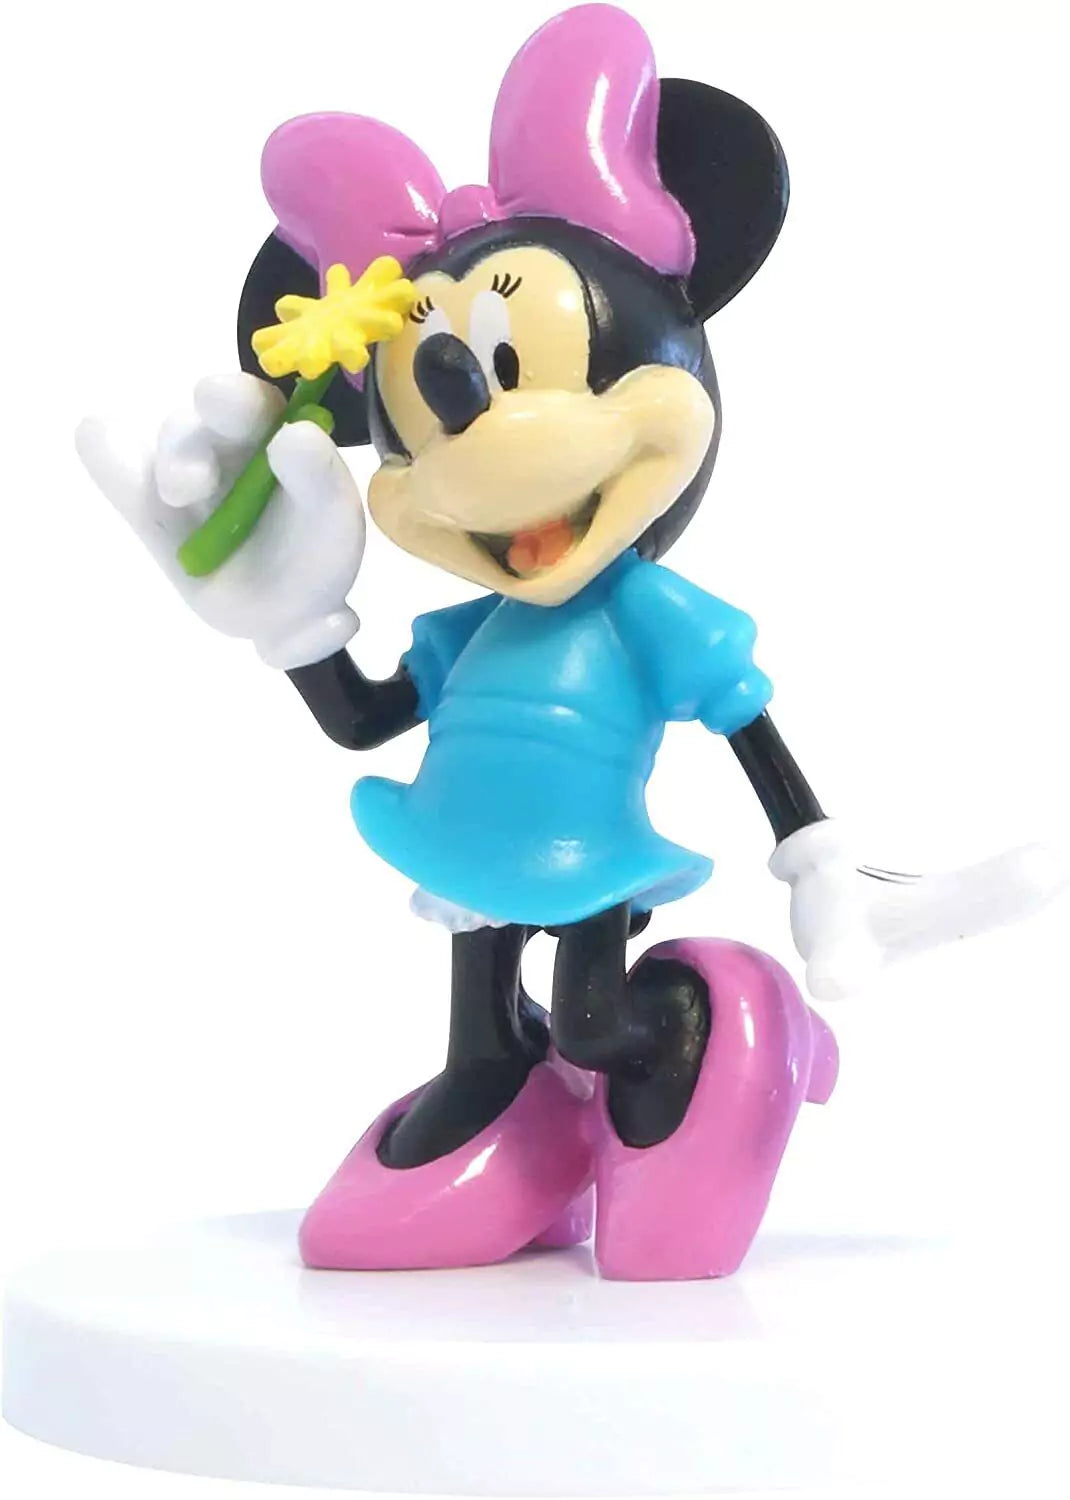 Mickey Mouse & Friends Disney Mini Figures - Minnie, Pluto, Daisy Duck 13 to Collect Party Favour Cake Topper Blind Bags Pack of 10 - Toptoys2u